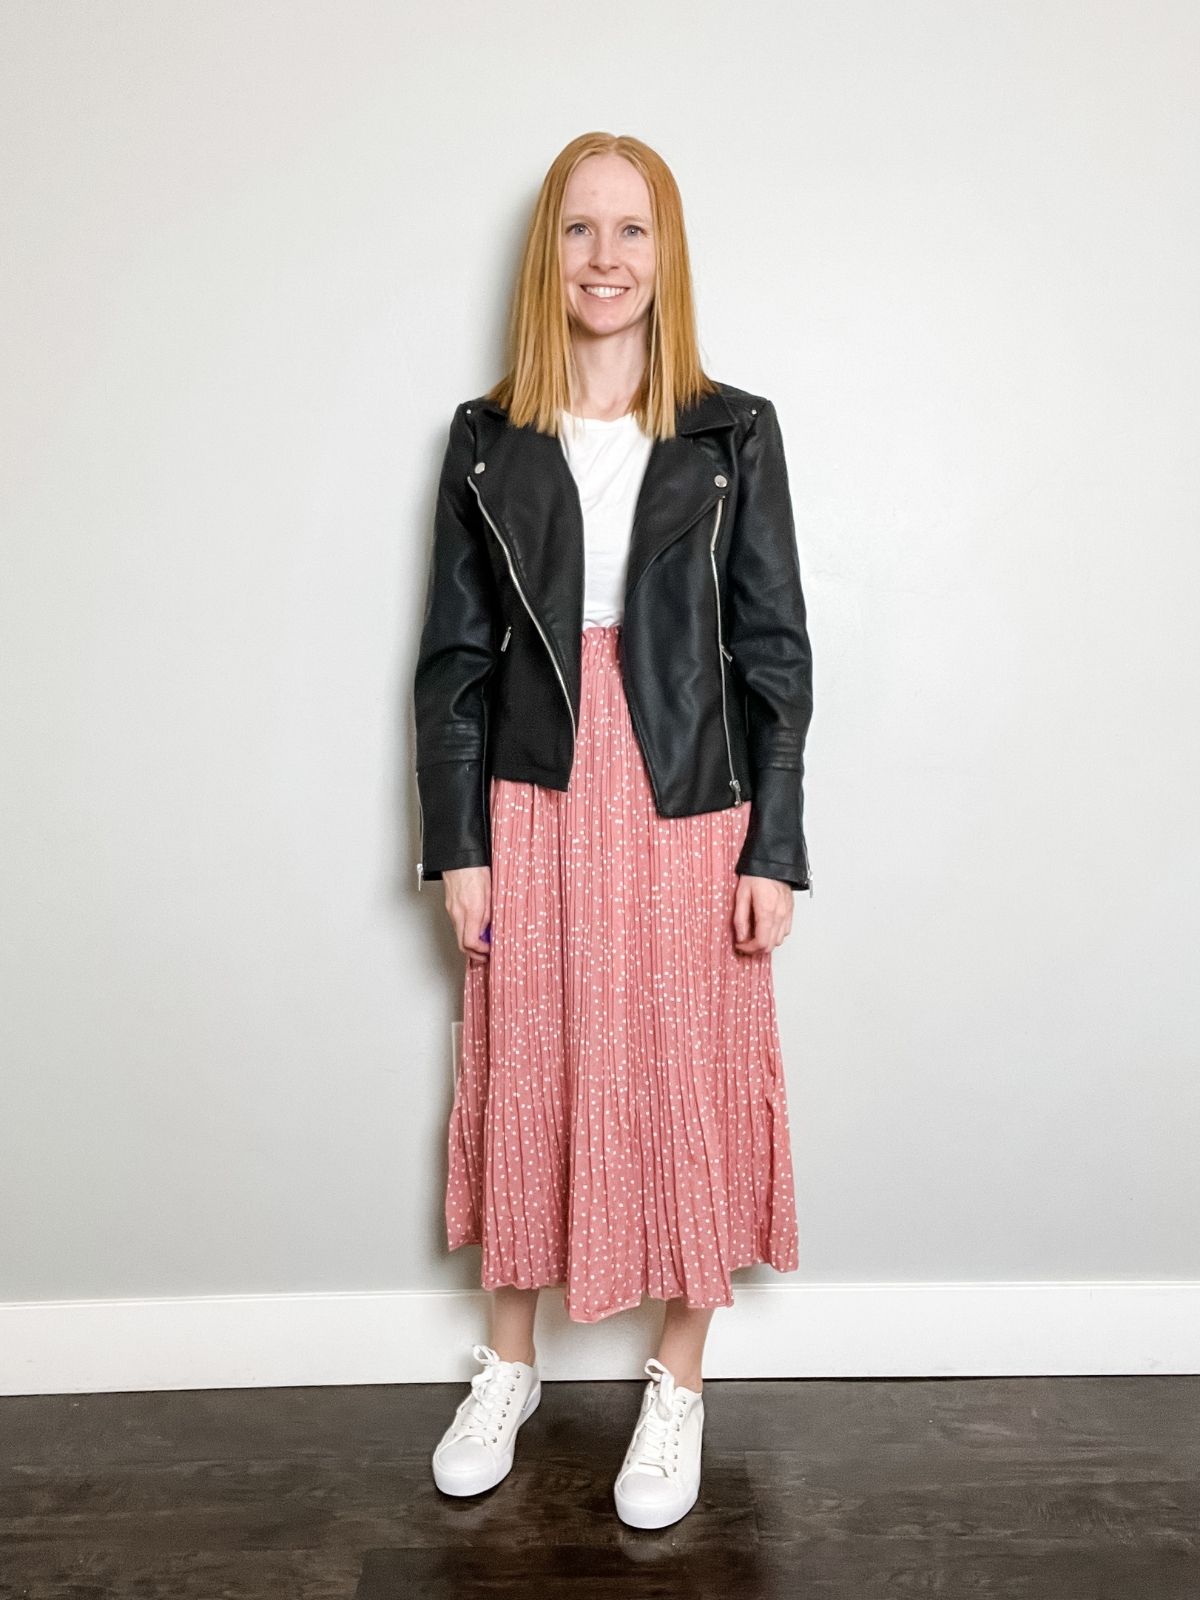 styling midi skirt with white shirt and leather jacket